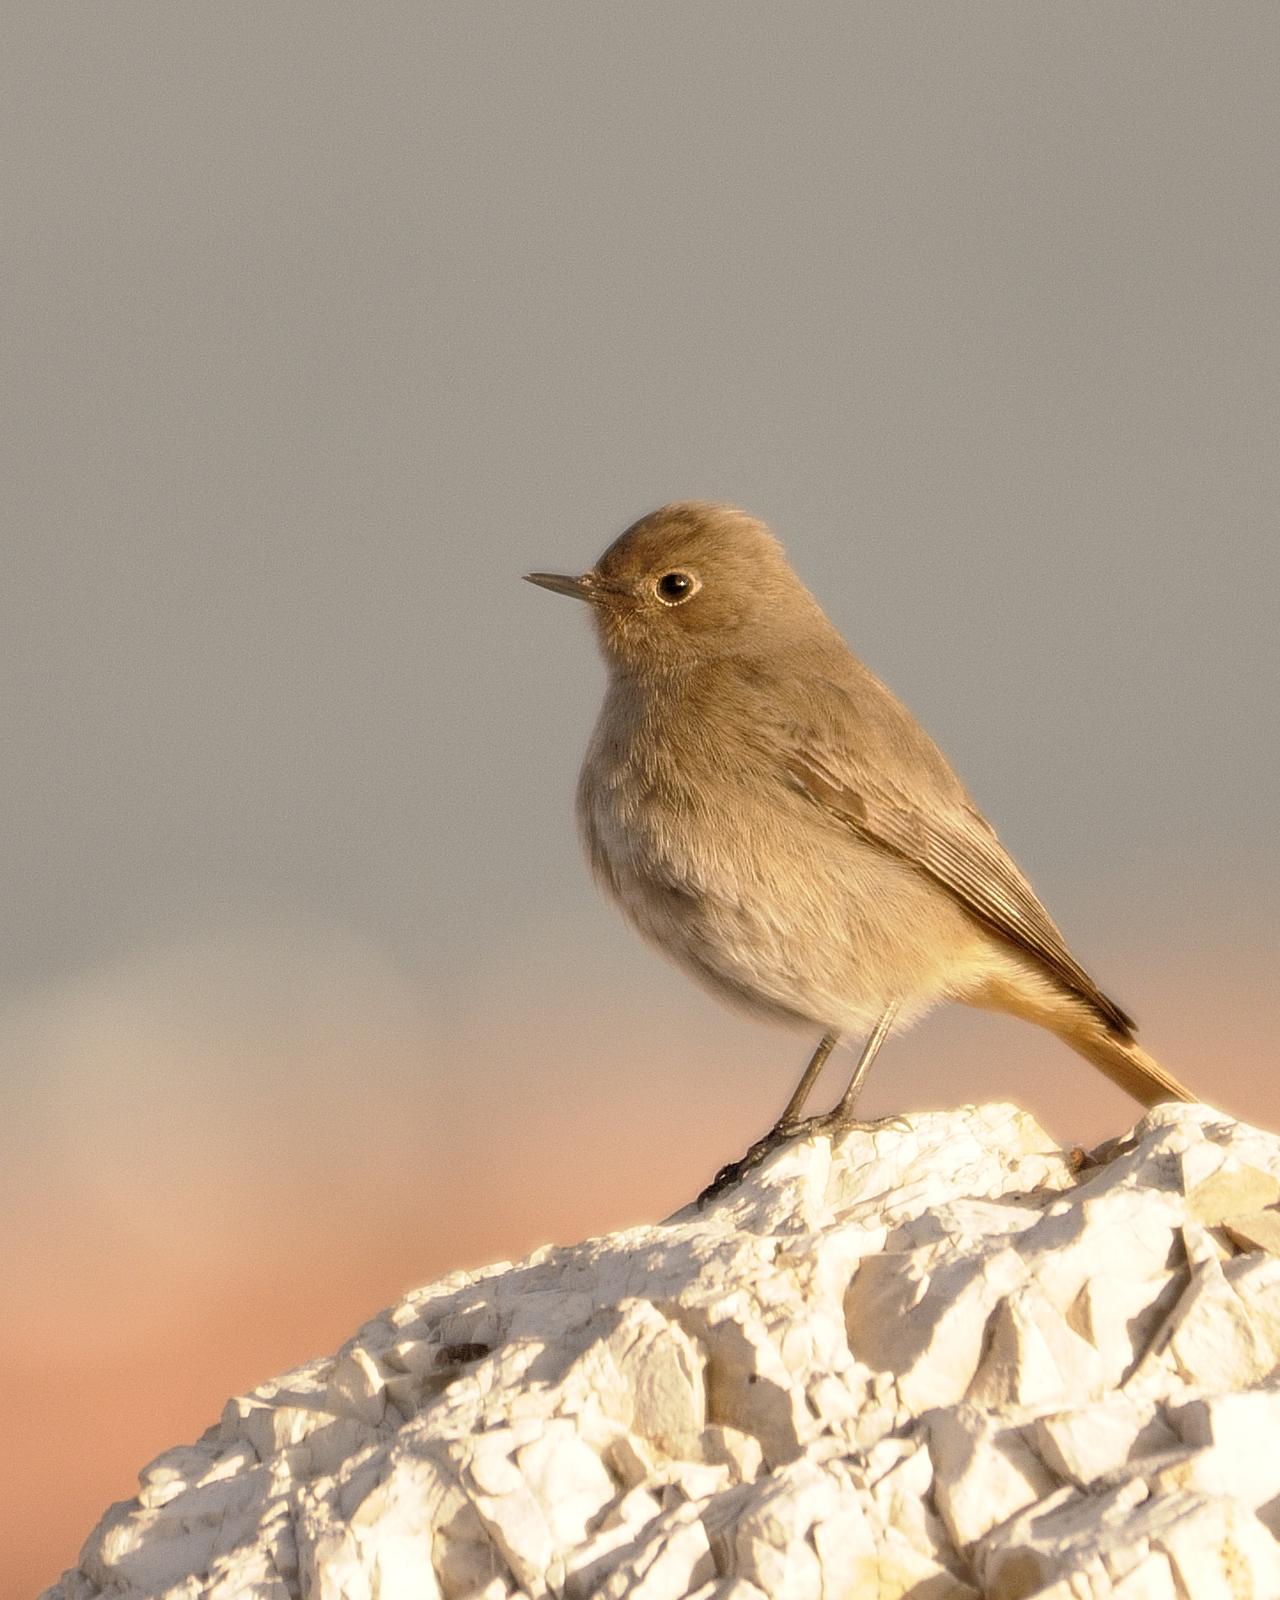 Black Redstart Photo by Andres Rios